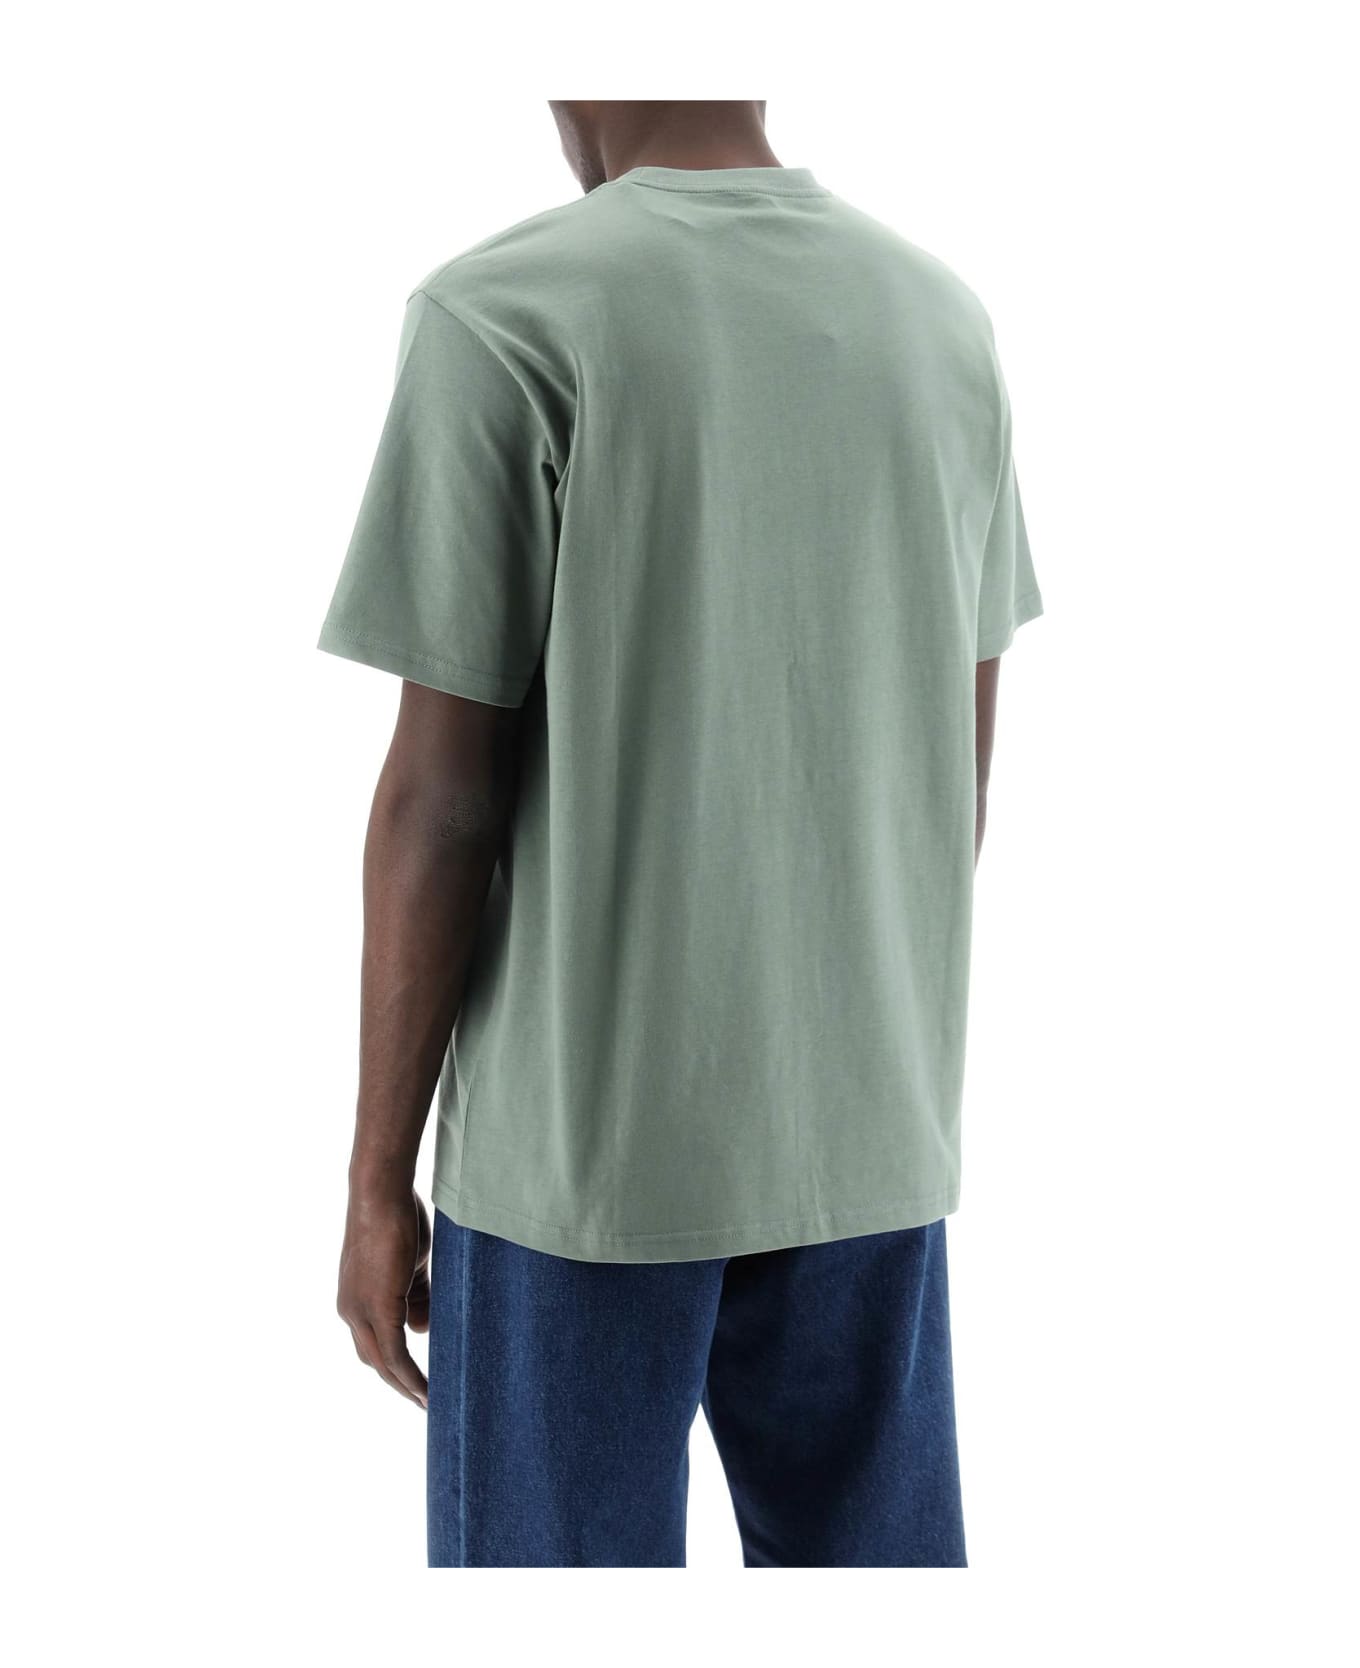 Carhartt T-shirt With Chest Pocket - Military